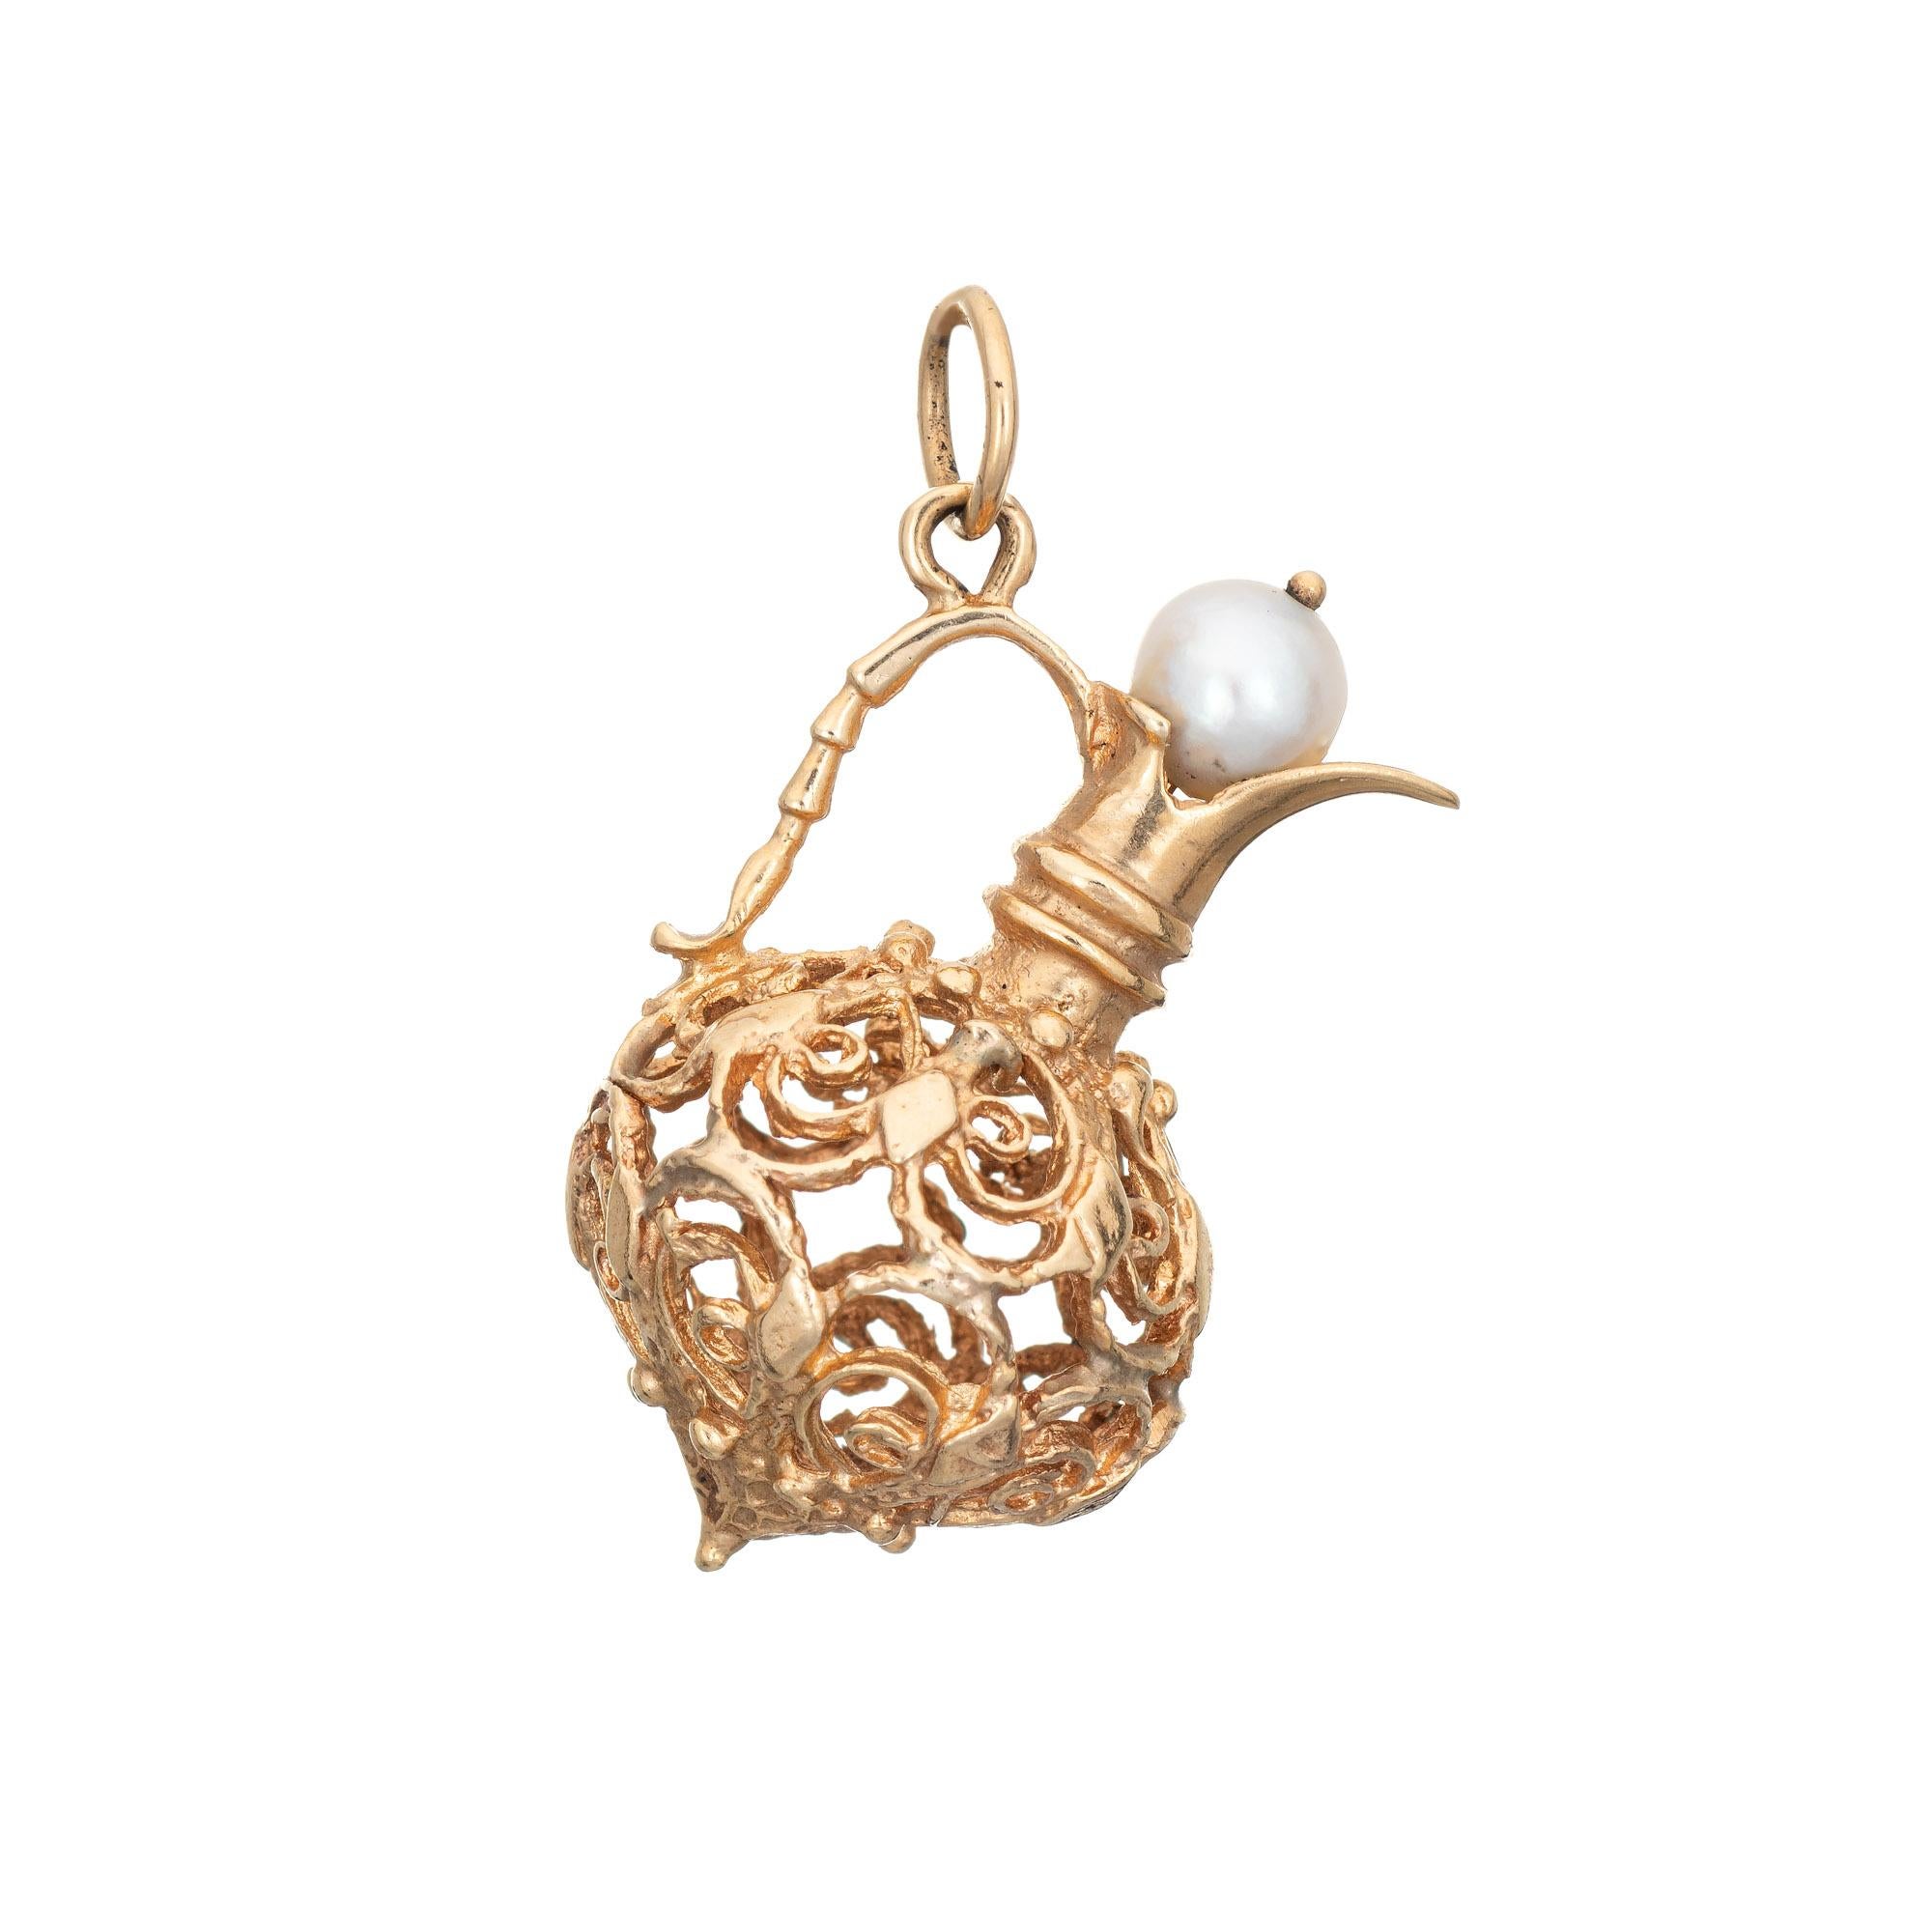 Finely detailed vintage jug pendant crafted in 14k yellow gold.  

One 5.8mm cultured pearl is set into the mount. 

The jug features an elaborate scrolled design. Ideal worn as a pendant or on a charm bracelet.

The charm is in very good condition.